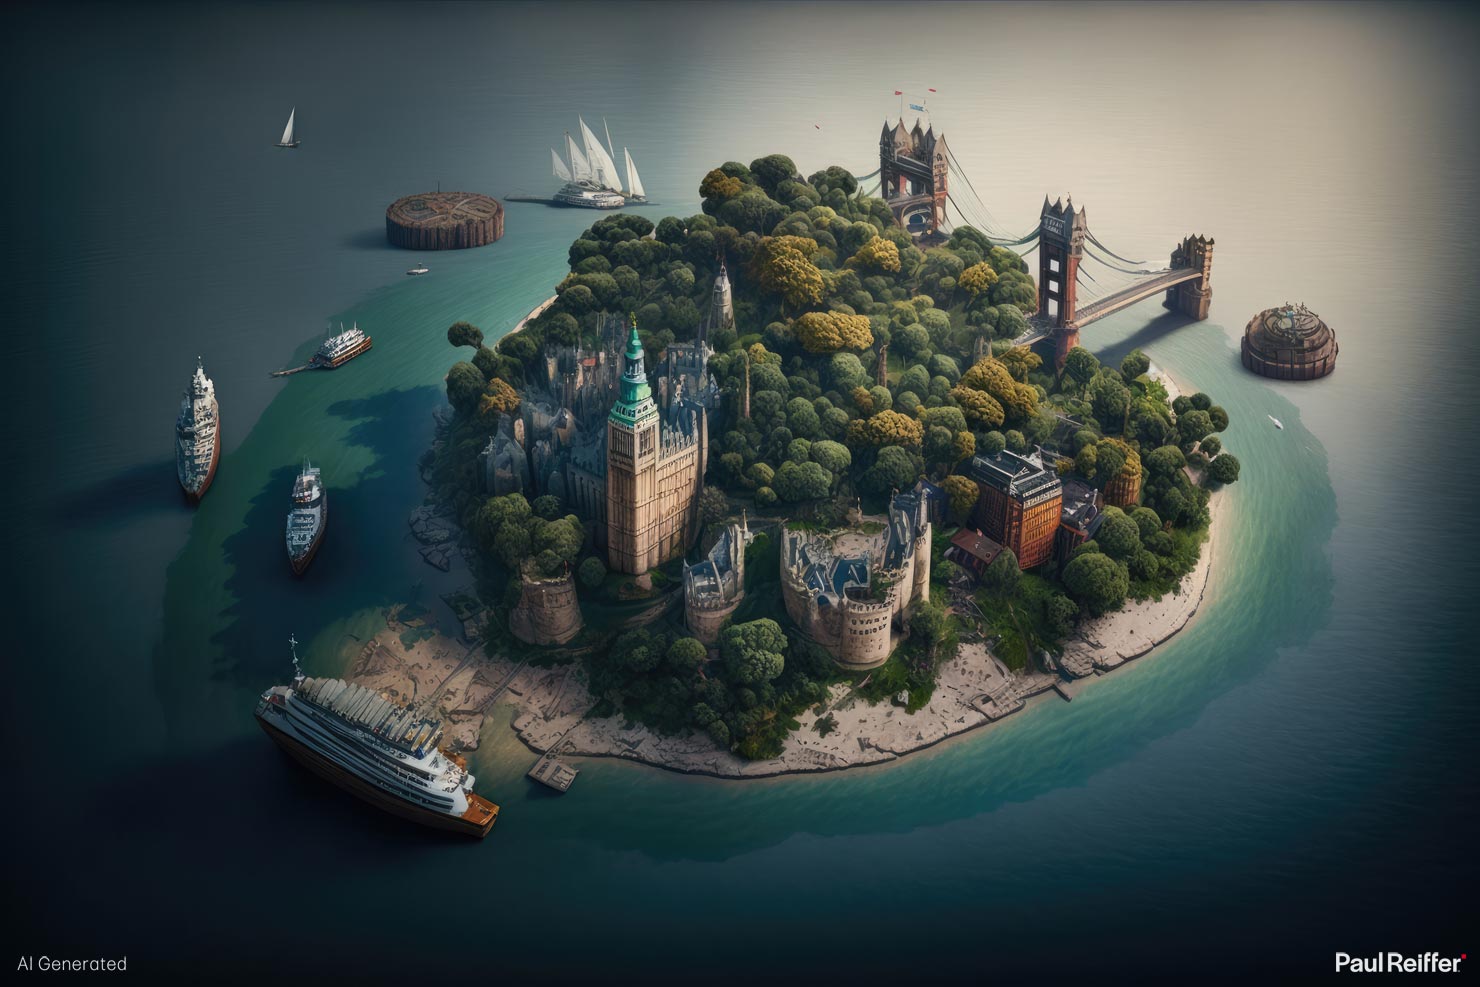 London Island Concept Fantasy Impossible Real Life Main Image Midjourney Dall E Photographers Landscape How To Use AI Images Good Bad Review Bard Bing ChatGPT Guide Paul Reiffer